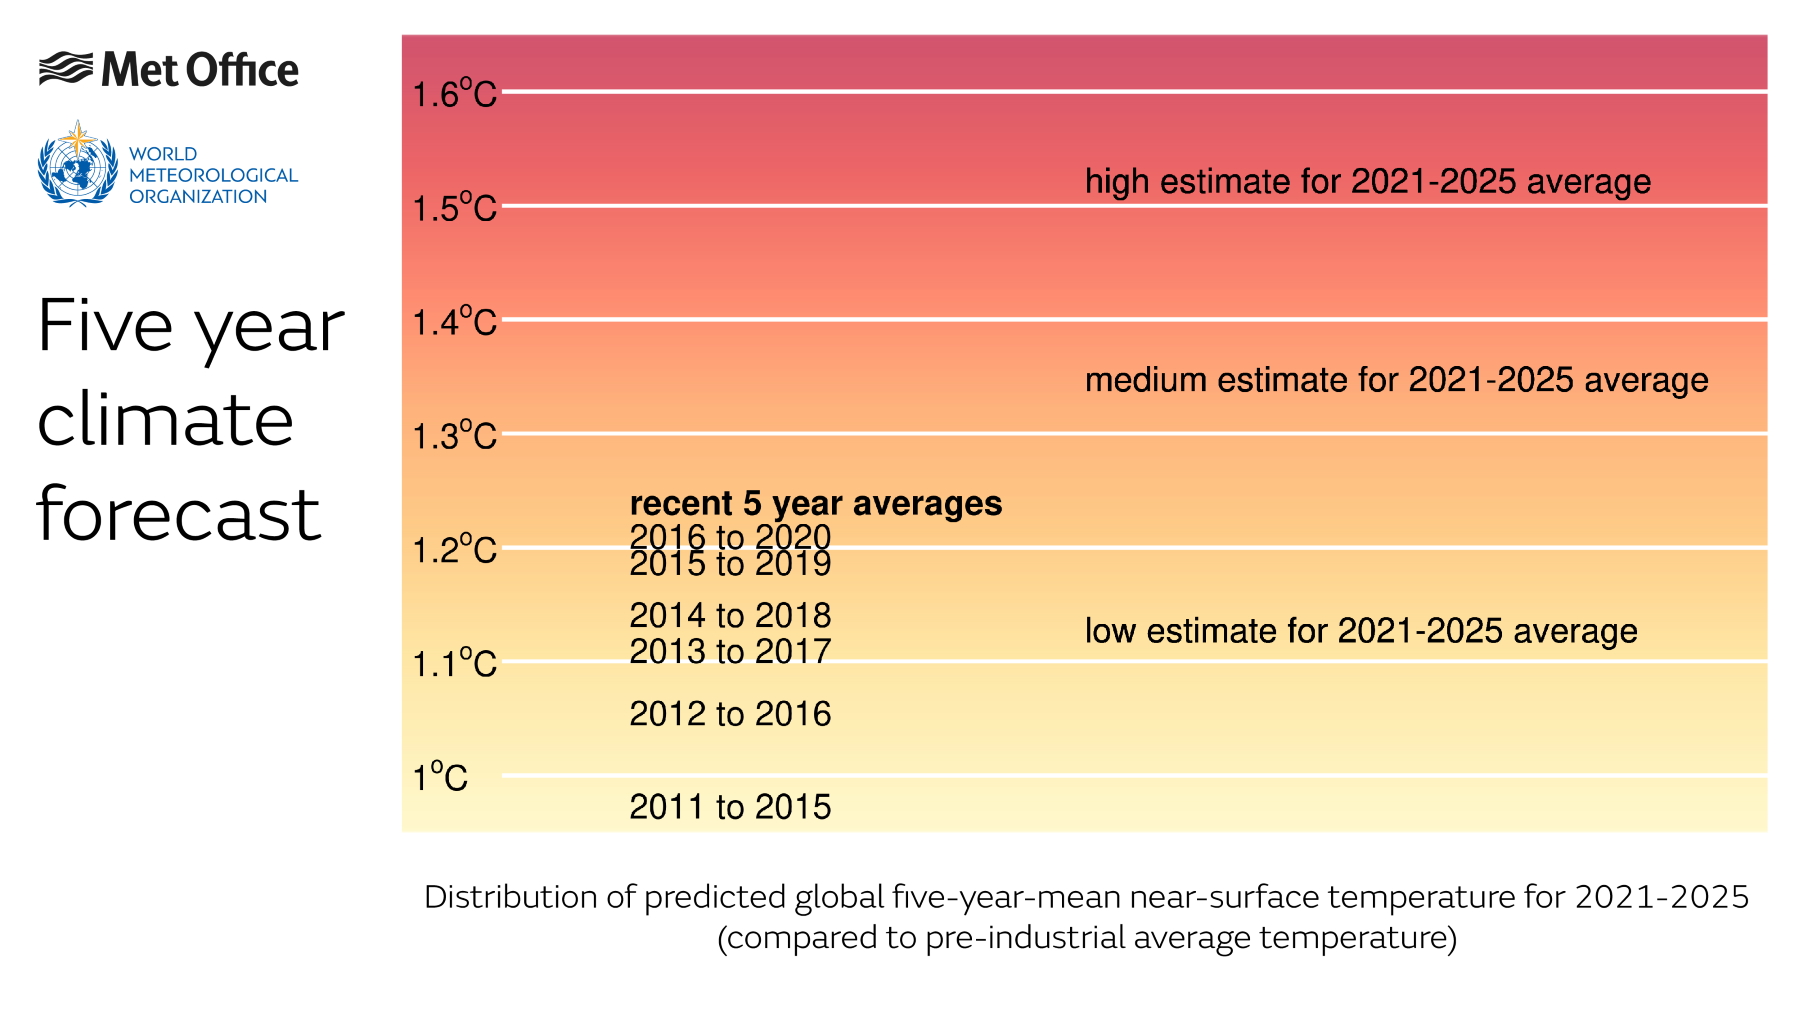 The average temperature for the five-year period 2021 to 2025 is likely to be higher than all of the recent five-year periods.